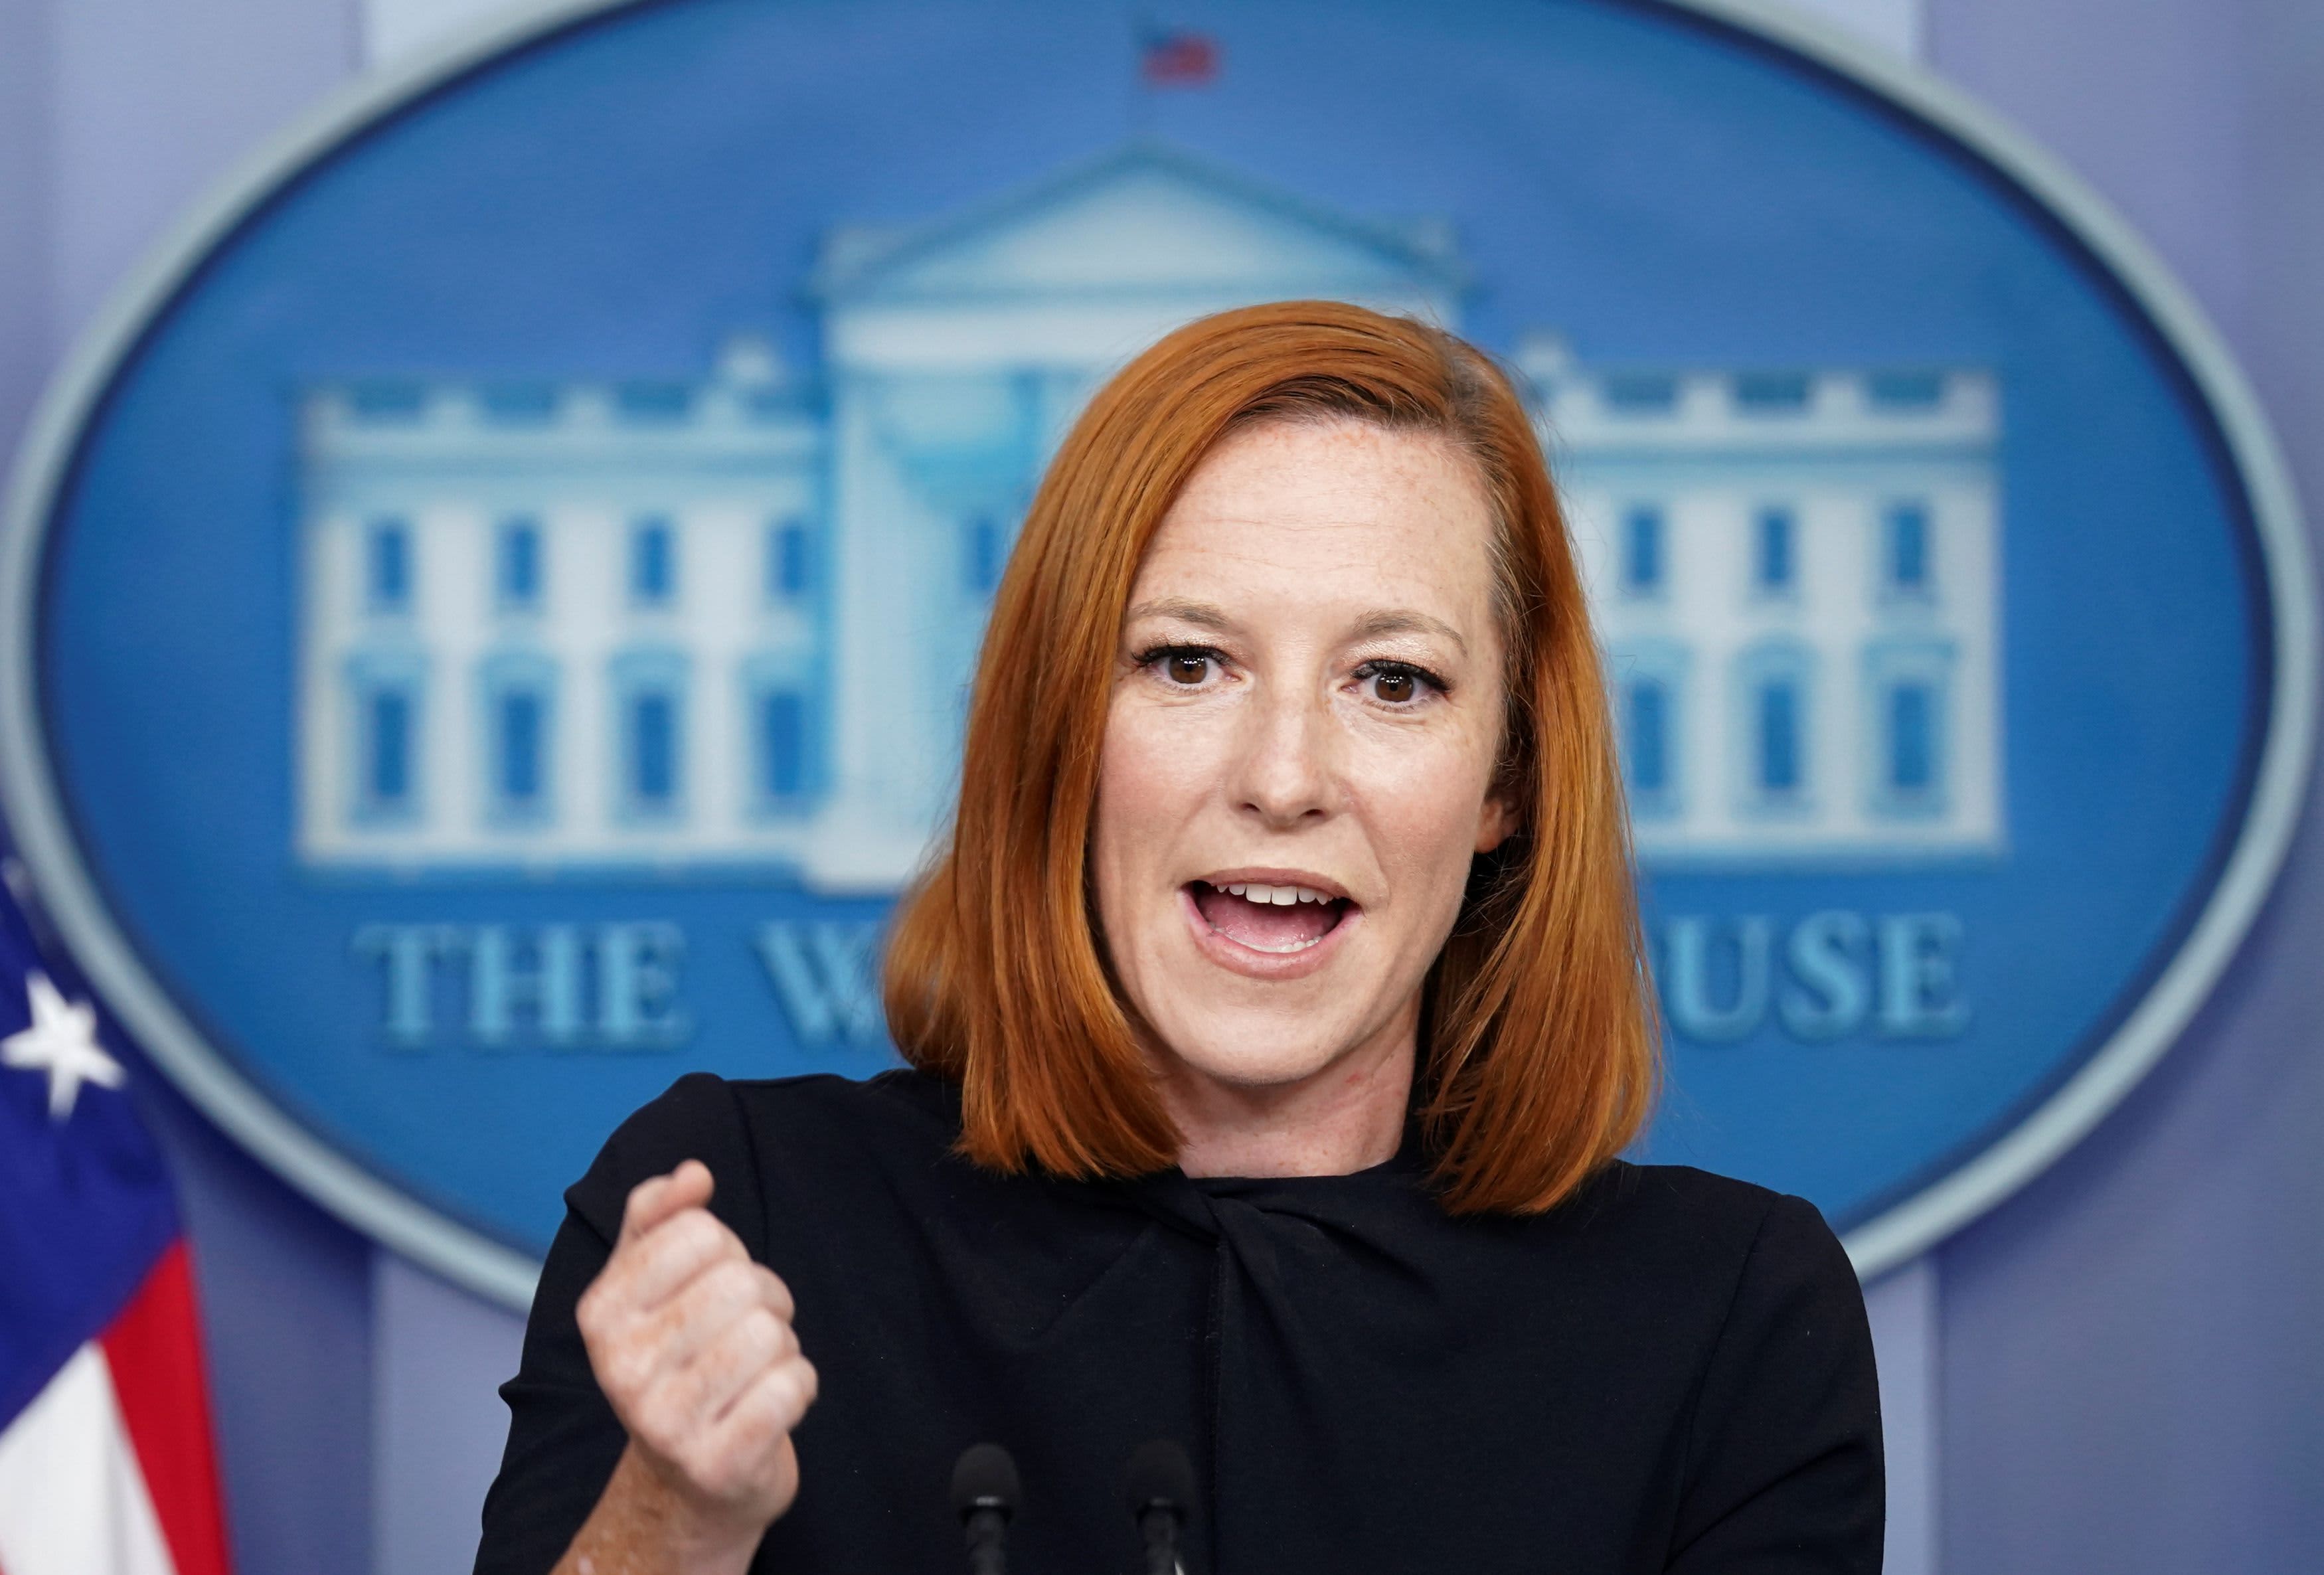 Biden press secretary Jen Psaki may have violated ethics law with comment on Virginia race watchdog says – CNBC